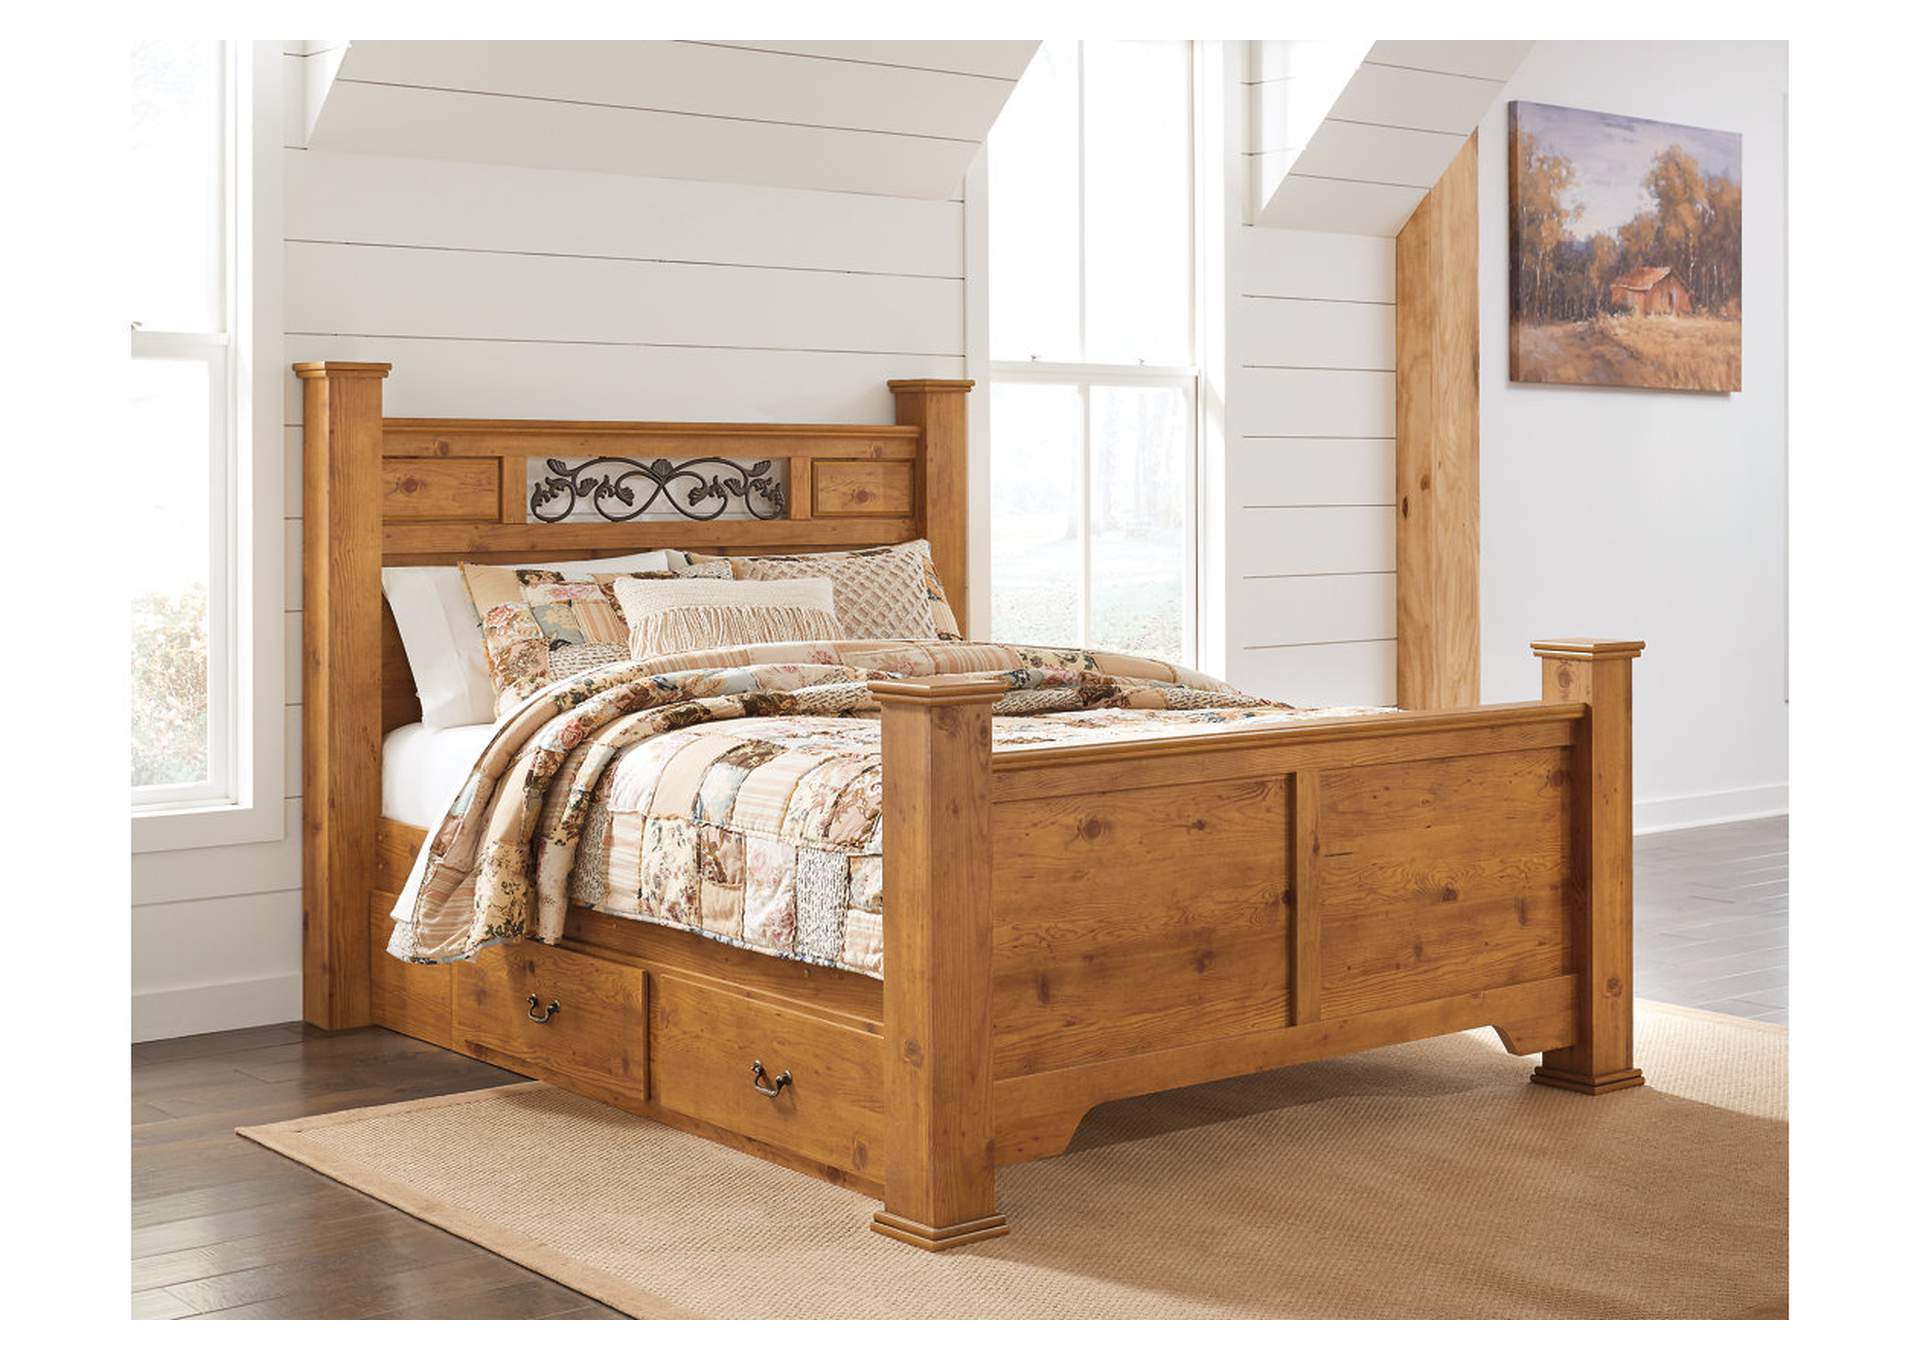 Bittersweet Queen Poster Bed with 2 Storage Drawers,Signature Design By Ashley